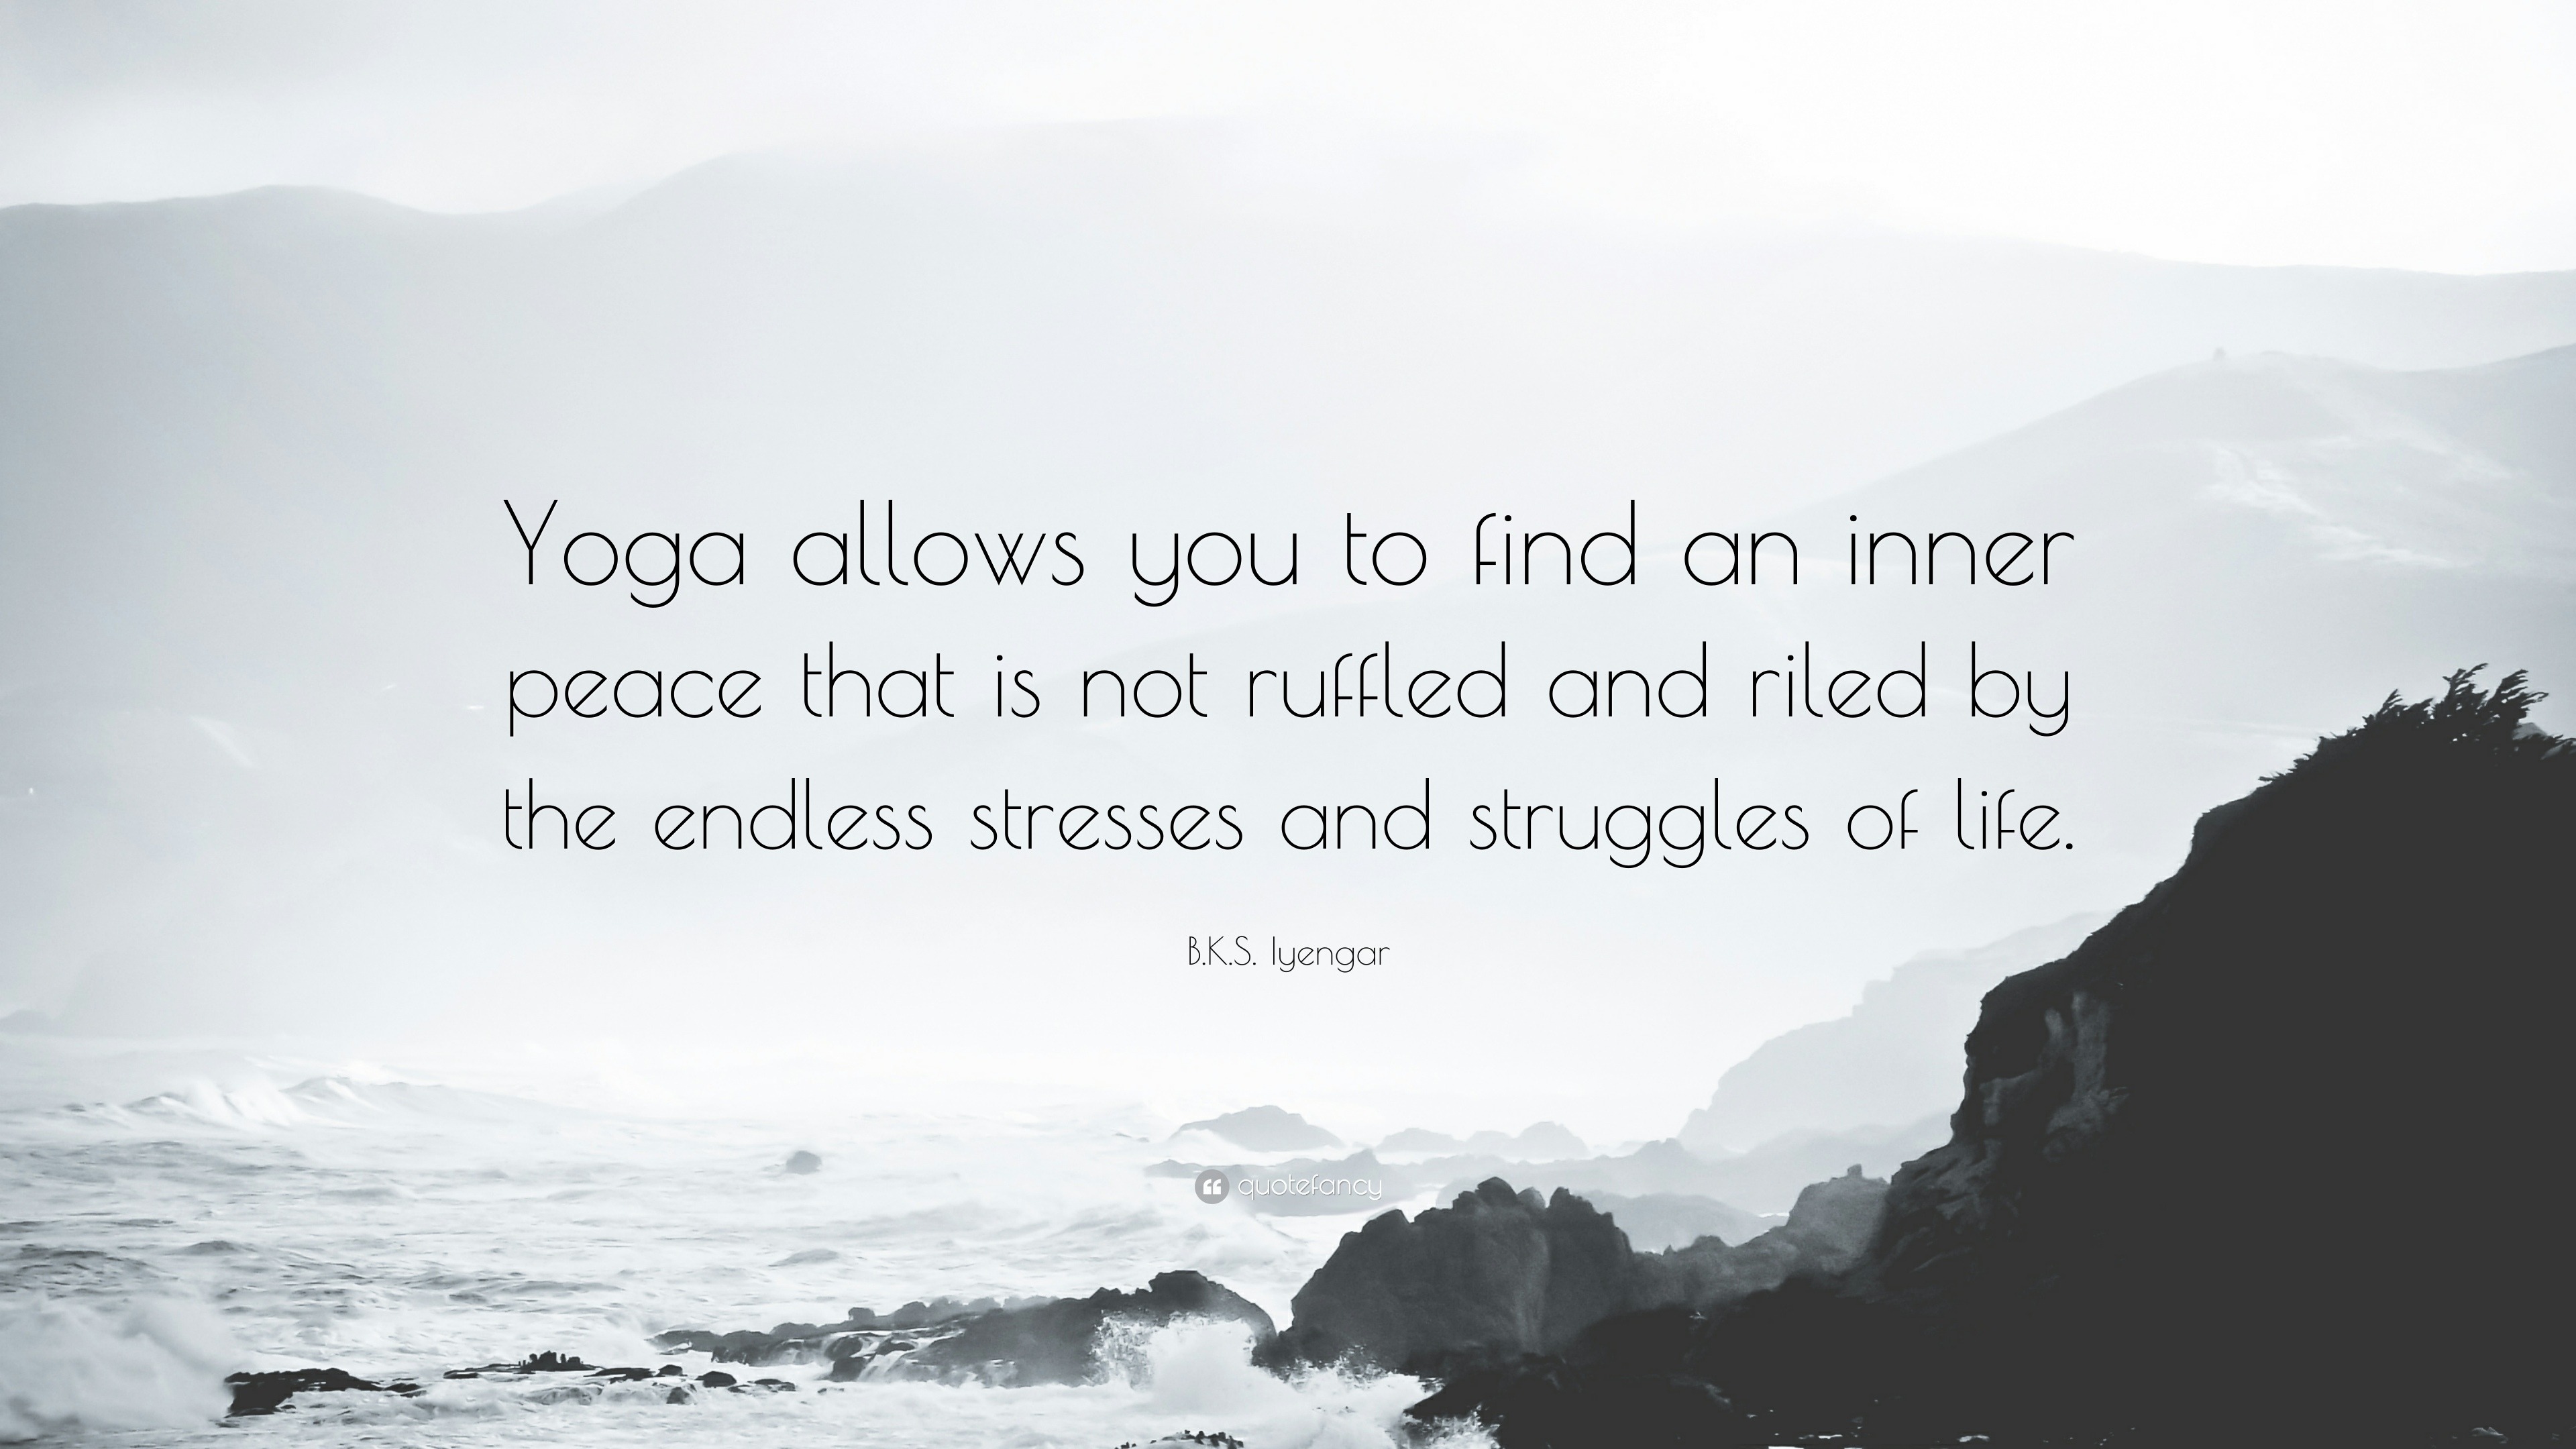 https://quotefancy.com/media/wallpaper/3840x2160/788078-B-K-S-Iyengar-Quote-Yoga-allows-you-to-find-an-inner-peace-that-is.jpg